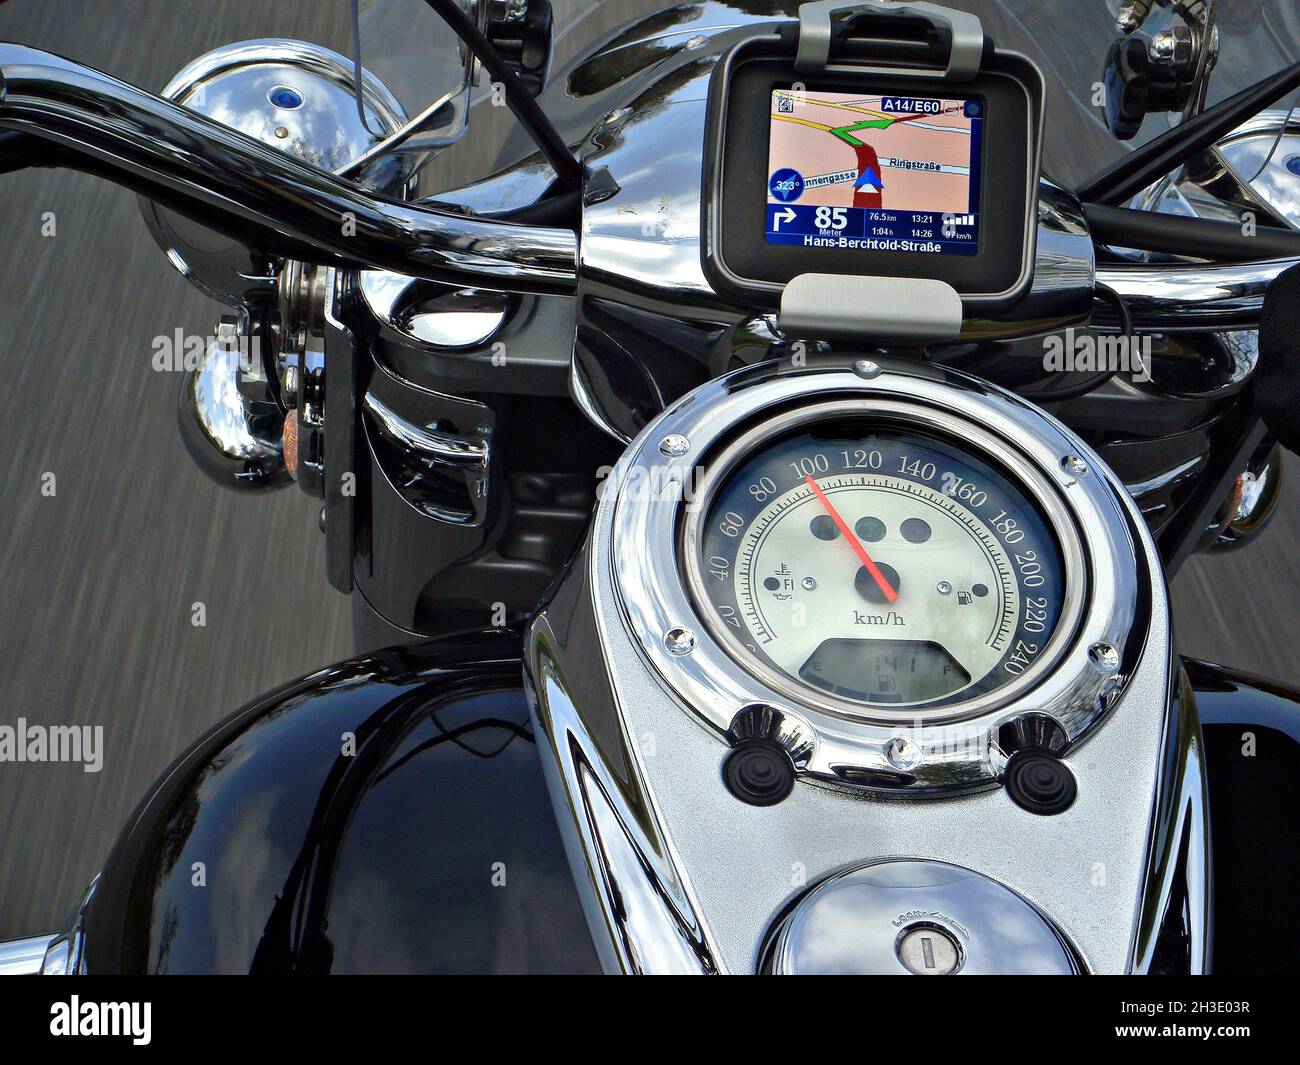 Motorcycle with Navigator, Germany Stock Photo